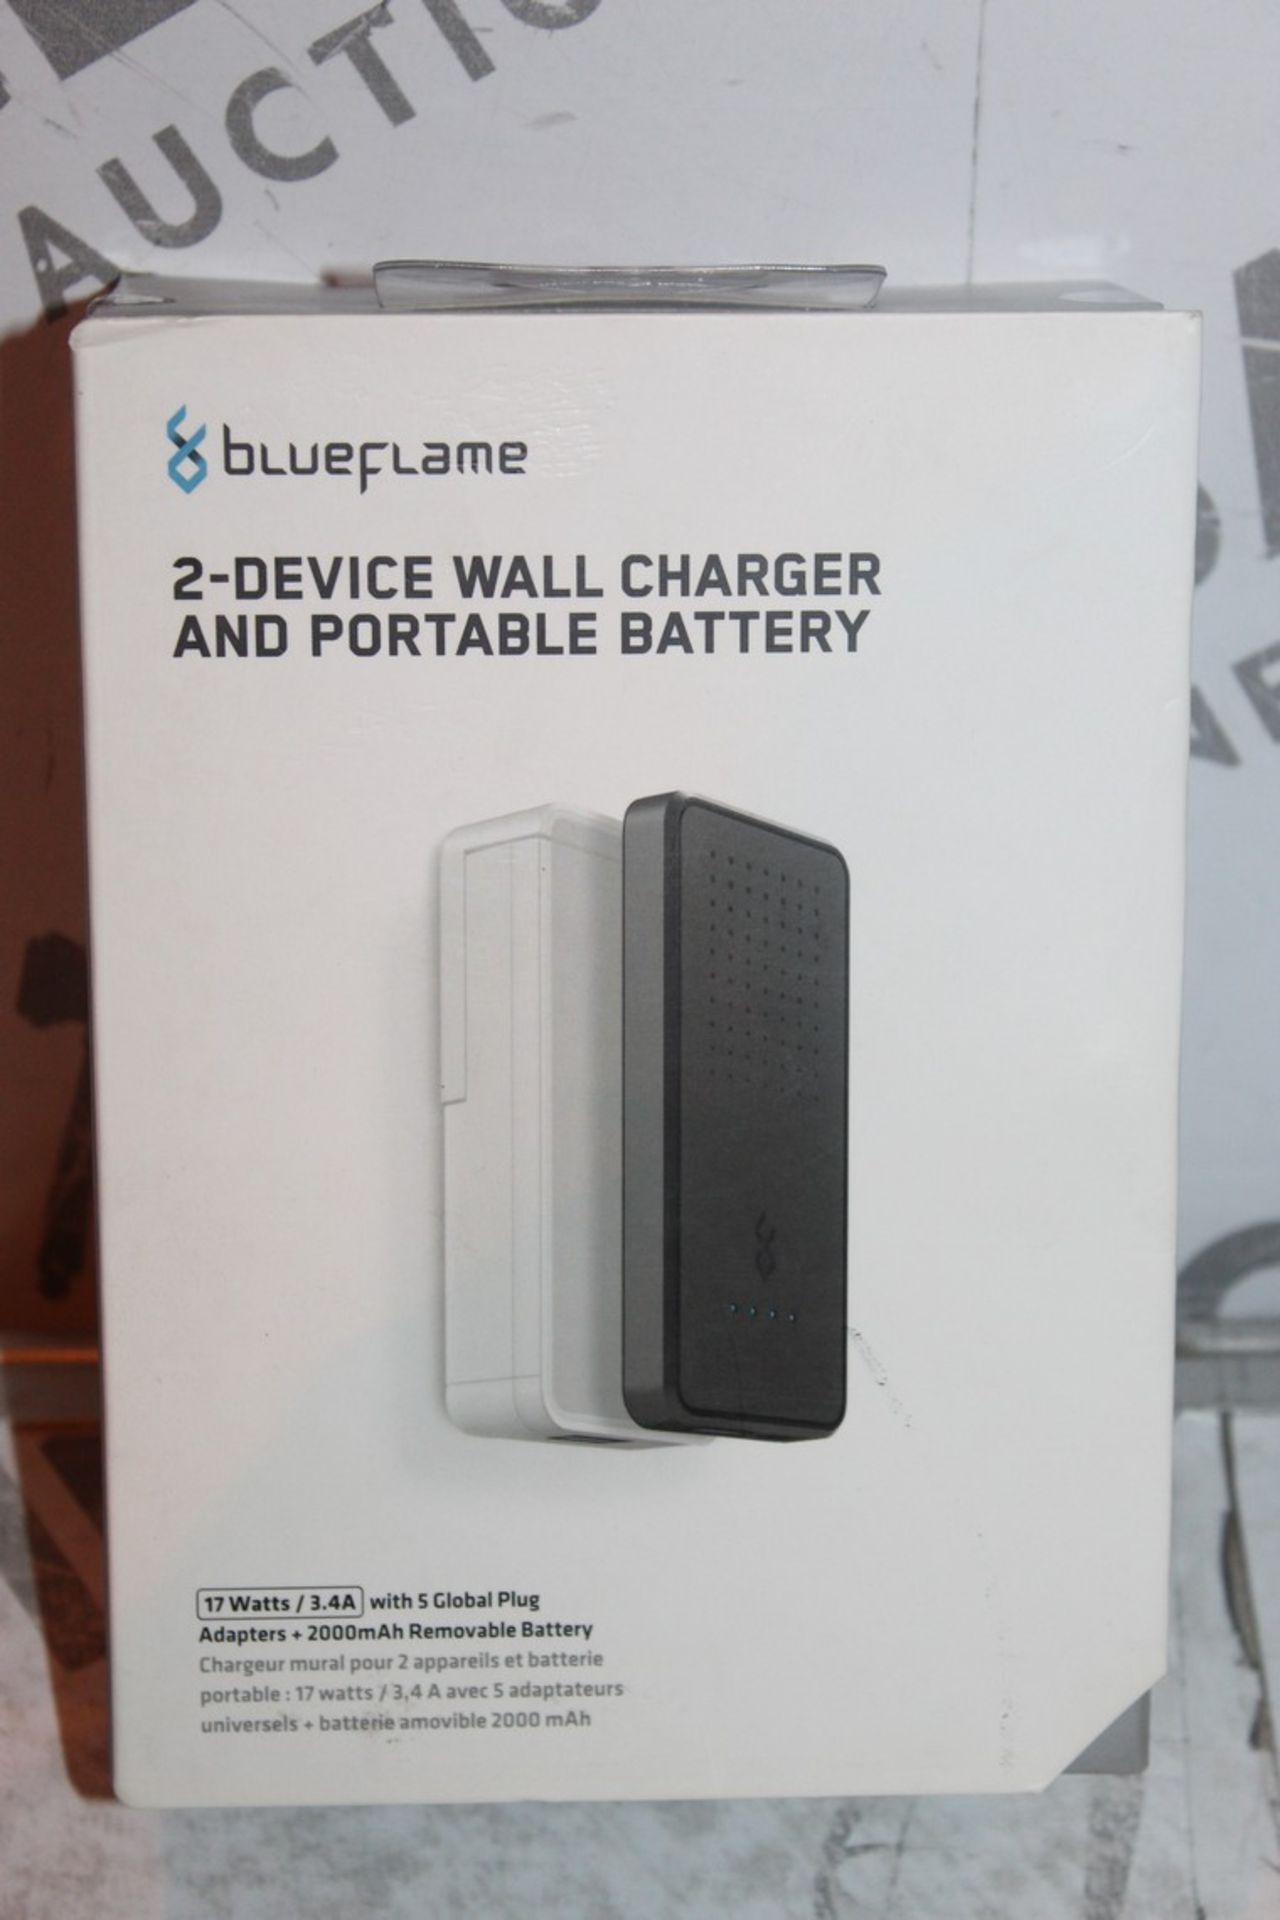 Lot to Contain 4 Blue Flame 2 Device Wall Chargers and Portable Battery Combined RRP £40